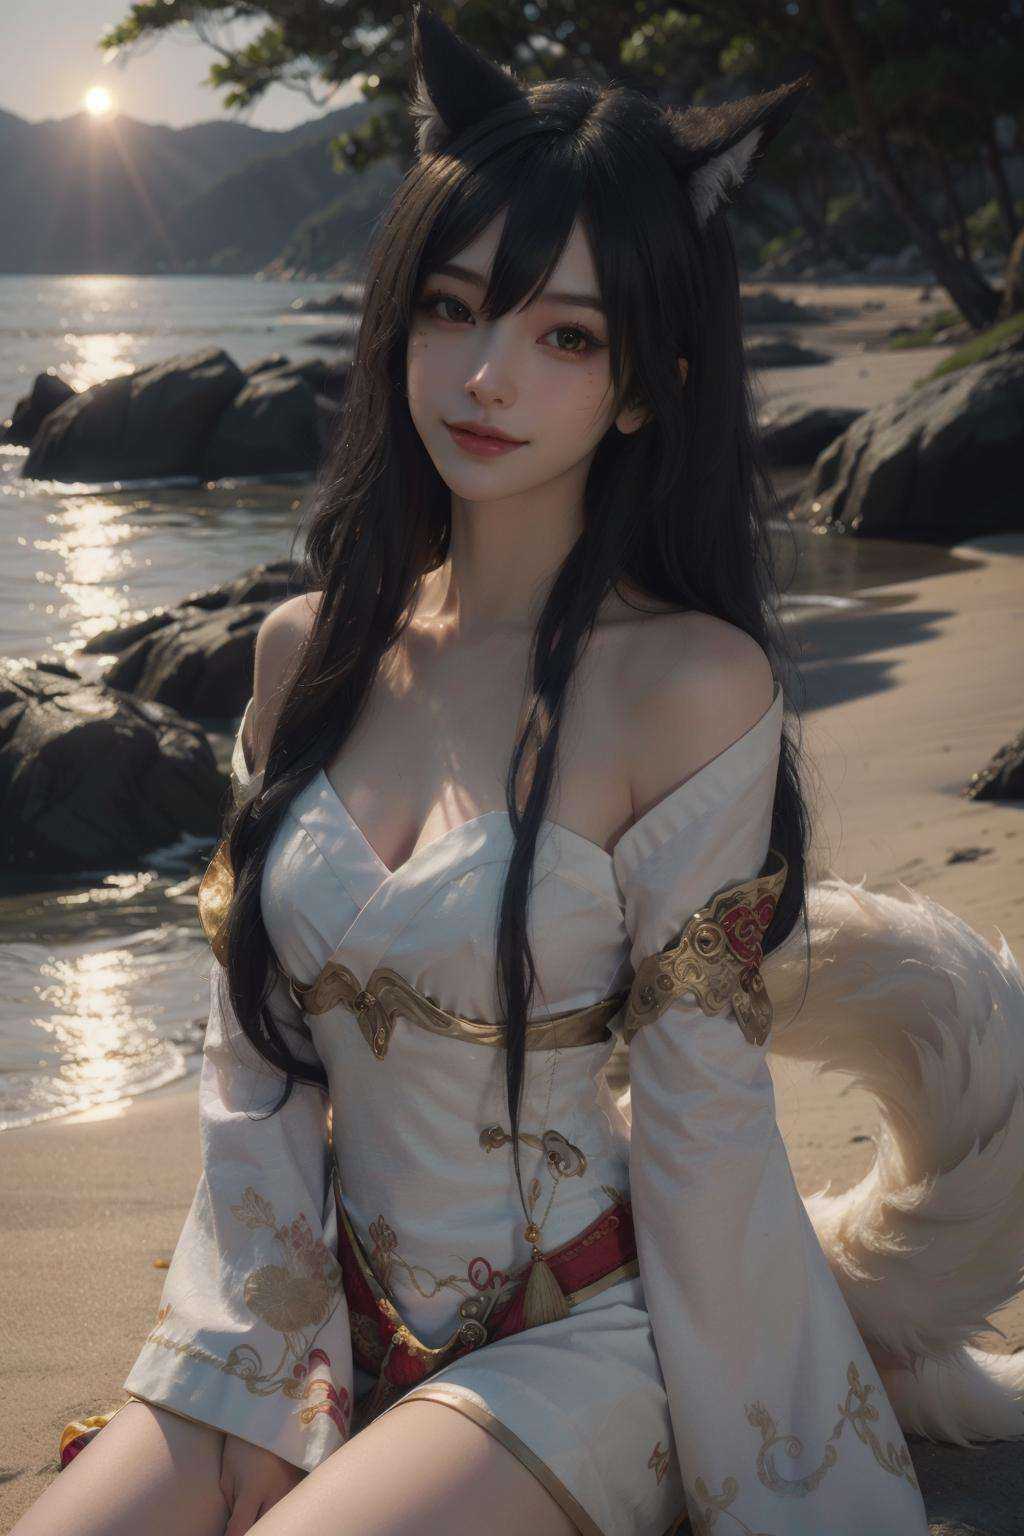 Best quality, masterpiece, ultra high res, (photorealistic:1.4), raw photo, 1girl,AHRI_COSPLAY, WHITE TAILS, BLACK LONG HAIR, YELLOW EYES, look at viewer, full body, warm smile,seaside, Golden hour makes everything warm and romantica beautiful woman, golden hour, rim lighting, warm tones, sun flare, soft shadows, vibrant colors, hazy glow, painterly effect, dreamy atmosphere<lora:80s Japan 2:0.4:PALETTE> <lora:OC:0.5:BODY0.5> <lora:Ahri_Cosplay:1> <lora:epiNoiseoffset_v2:0.5>  <lora:better-bg-001:0.3:KEEPBG>